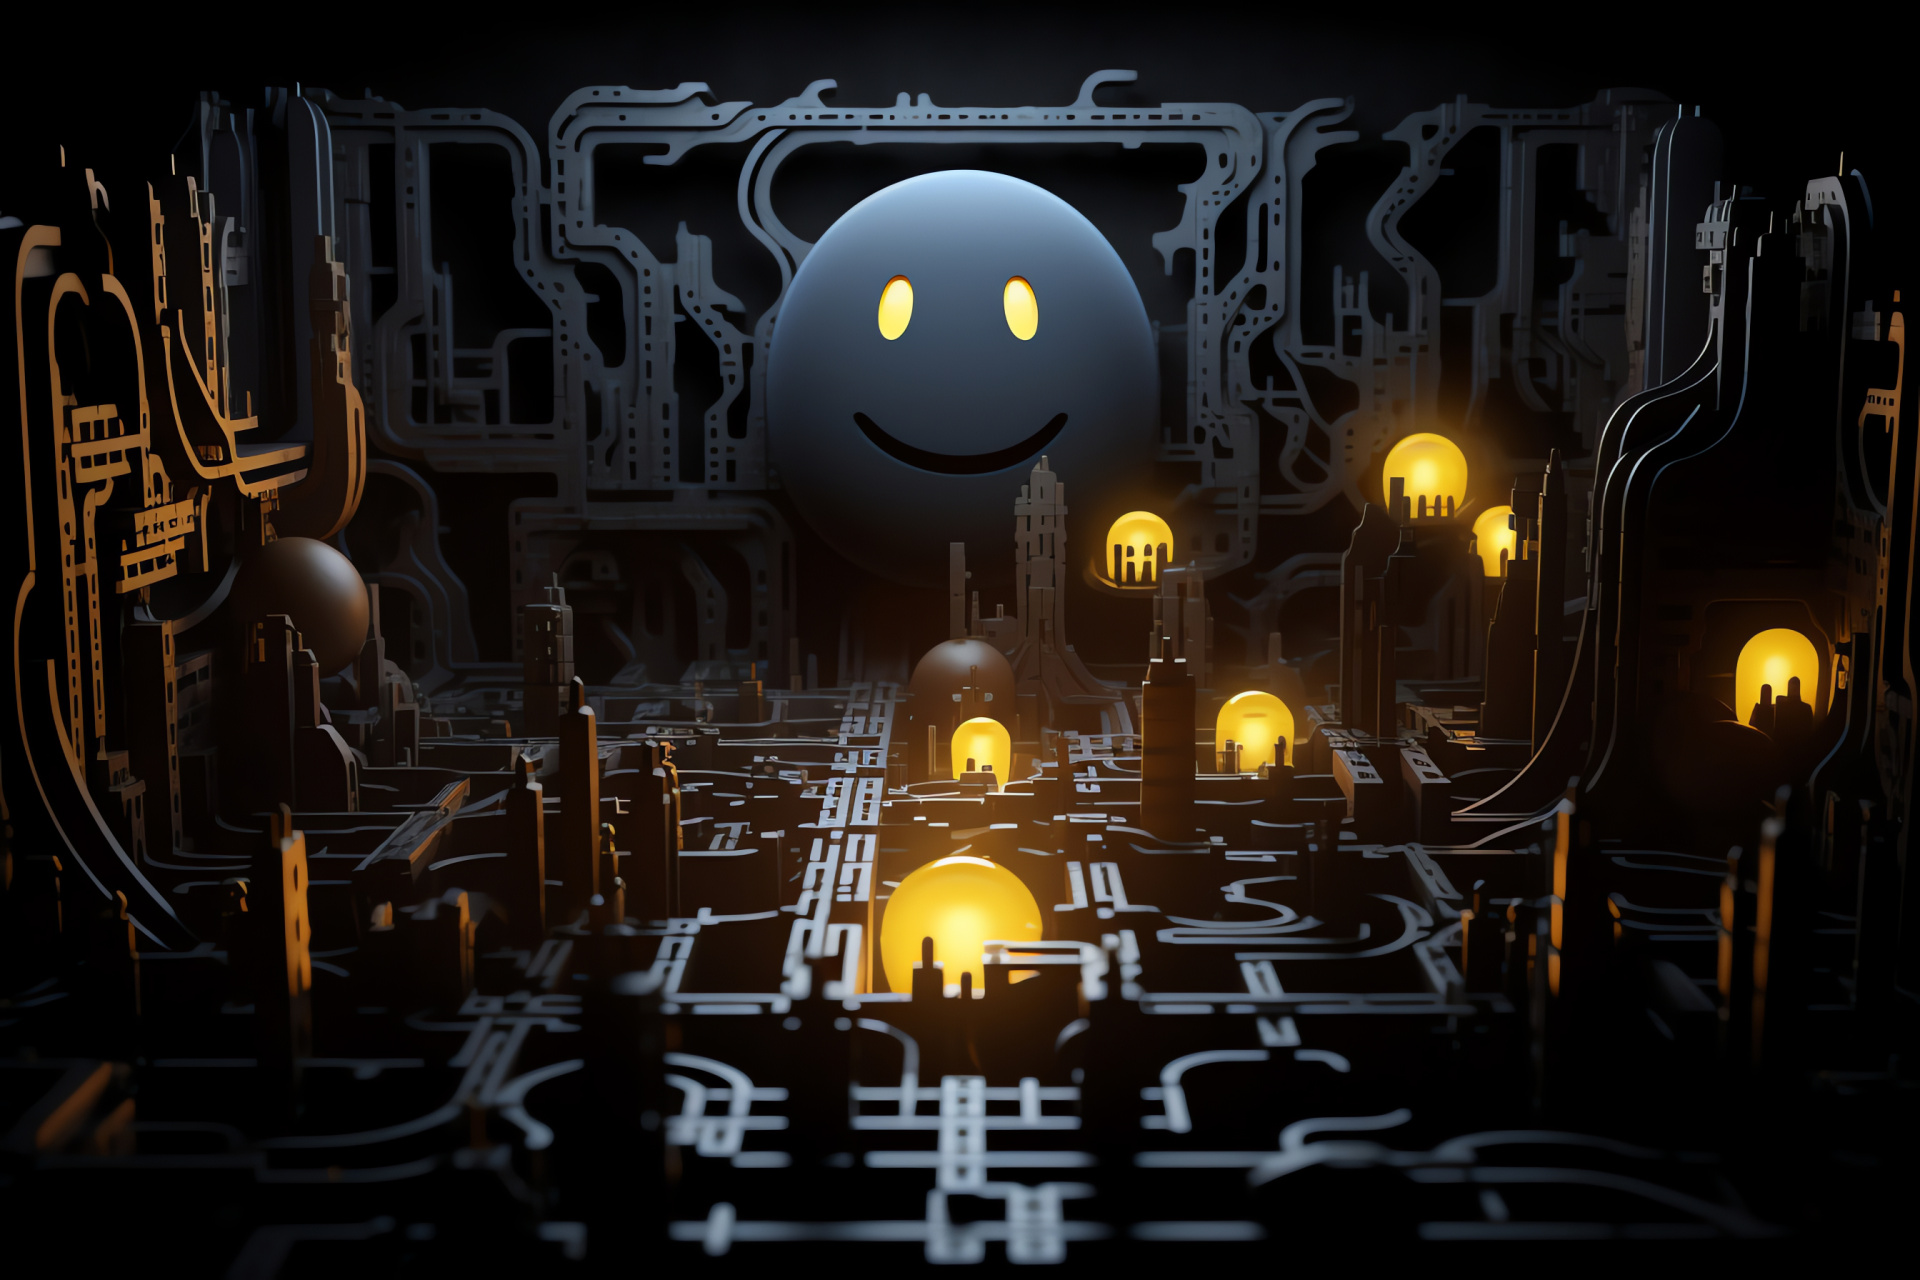 Haunted Pacman atmosphere, Spectral labyrinth design, Eerie ghost encounters, Maze chase, Energizing collectibles, HD Desktop Image